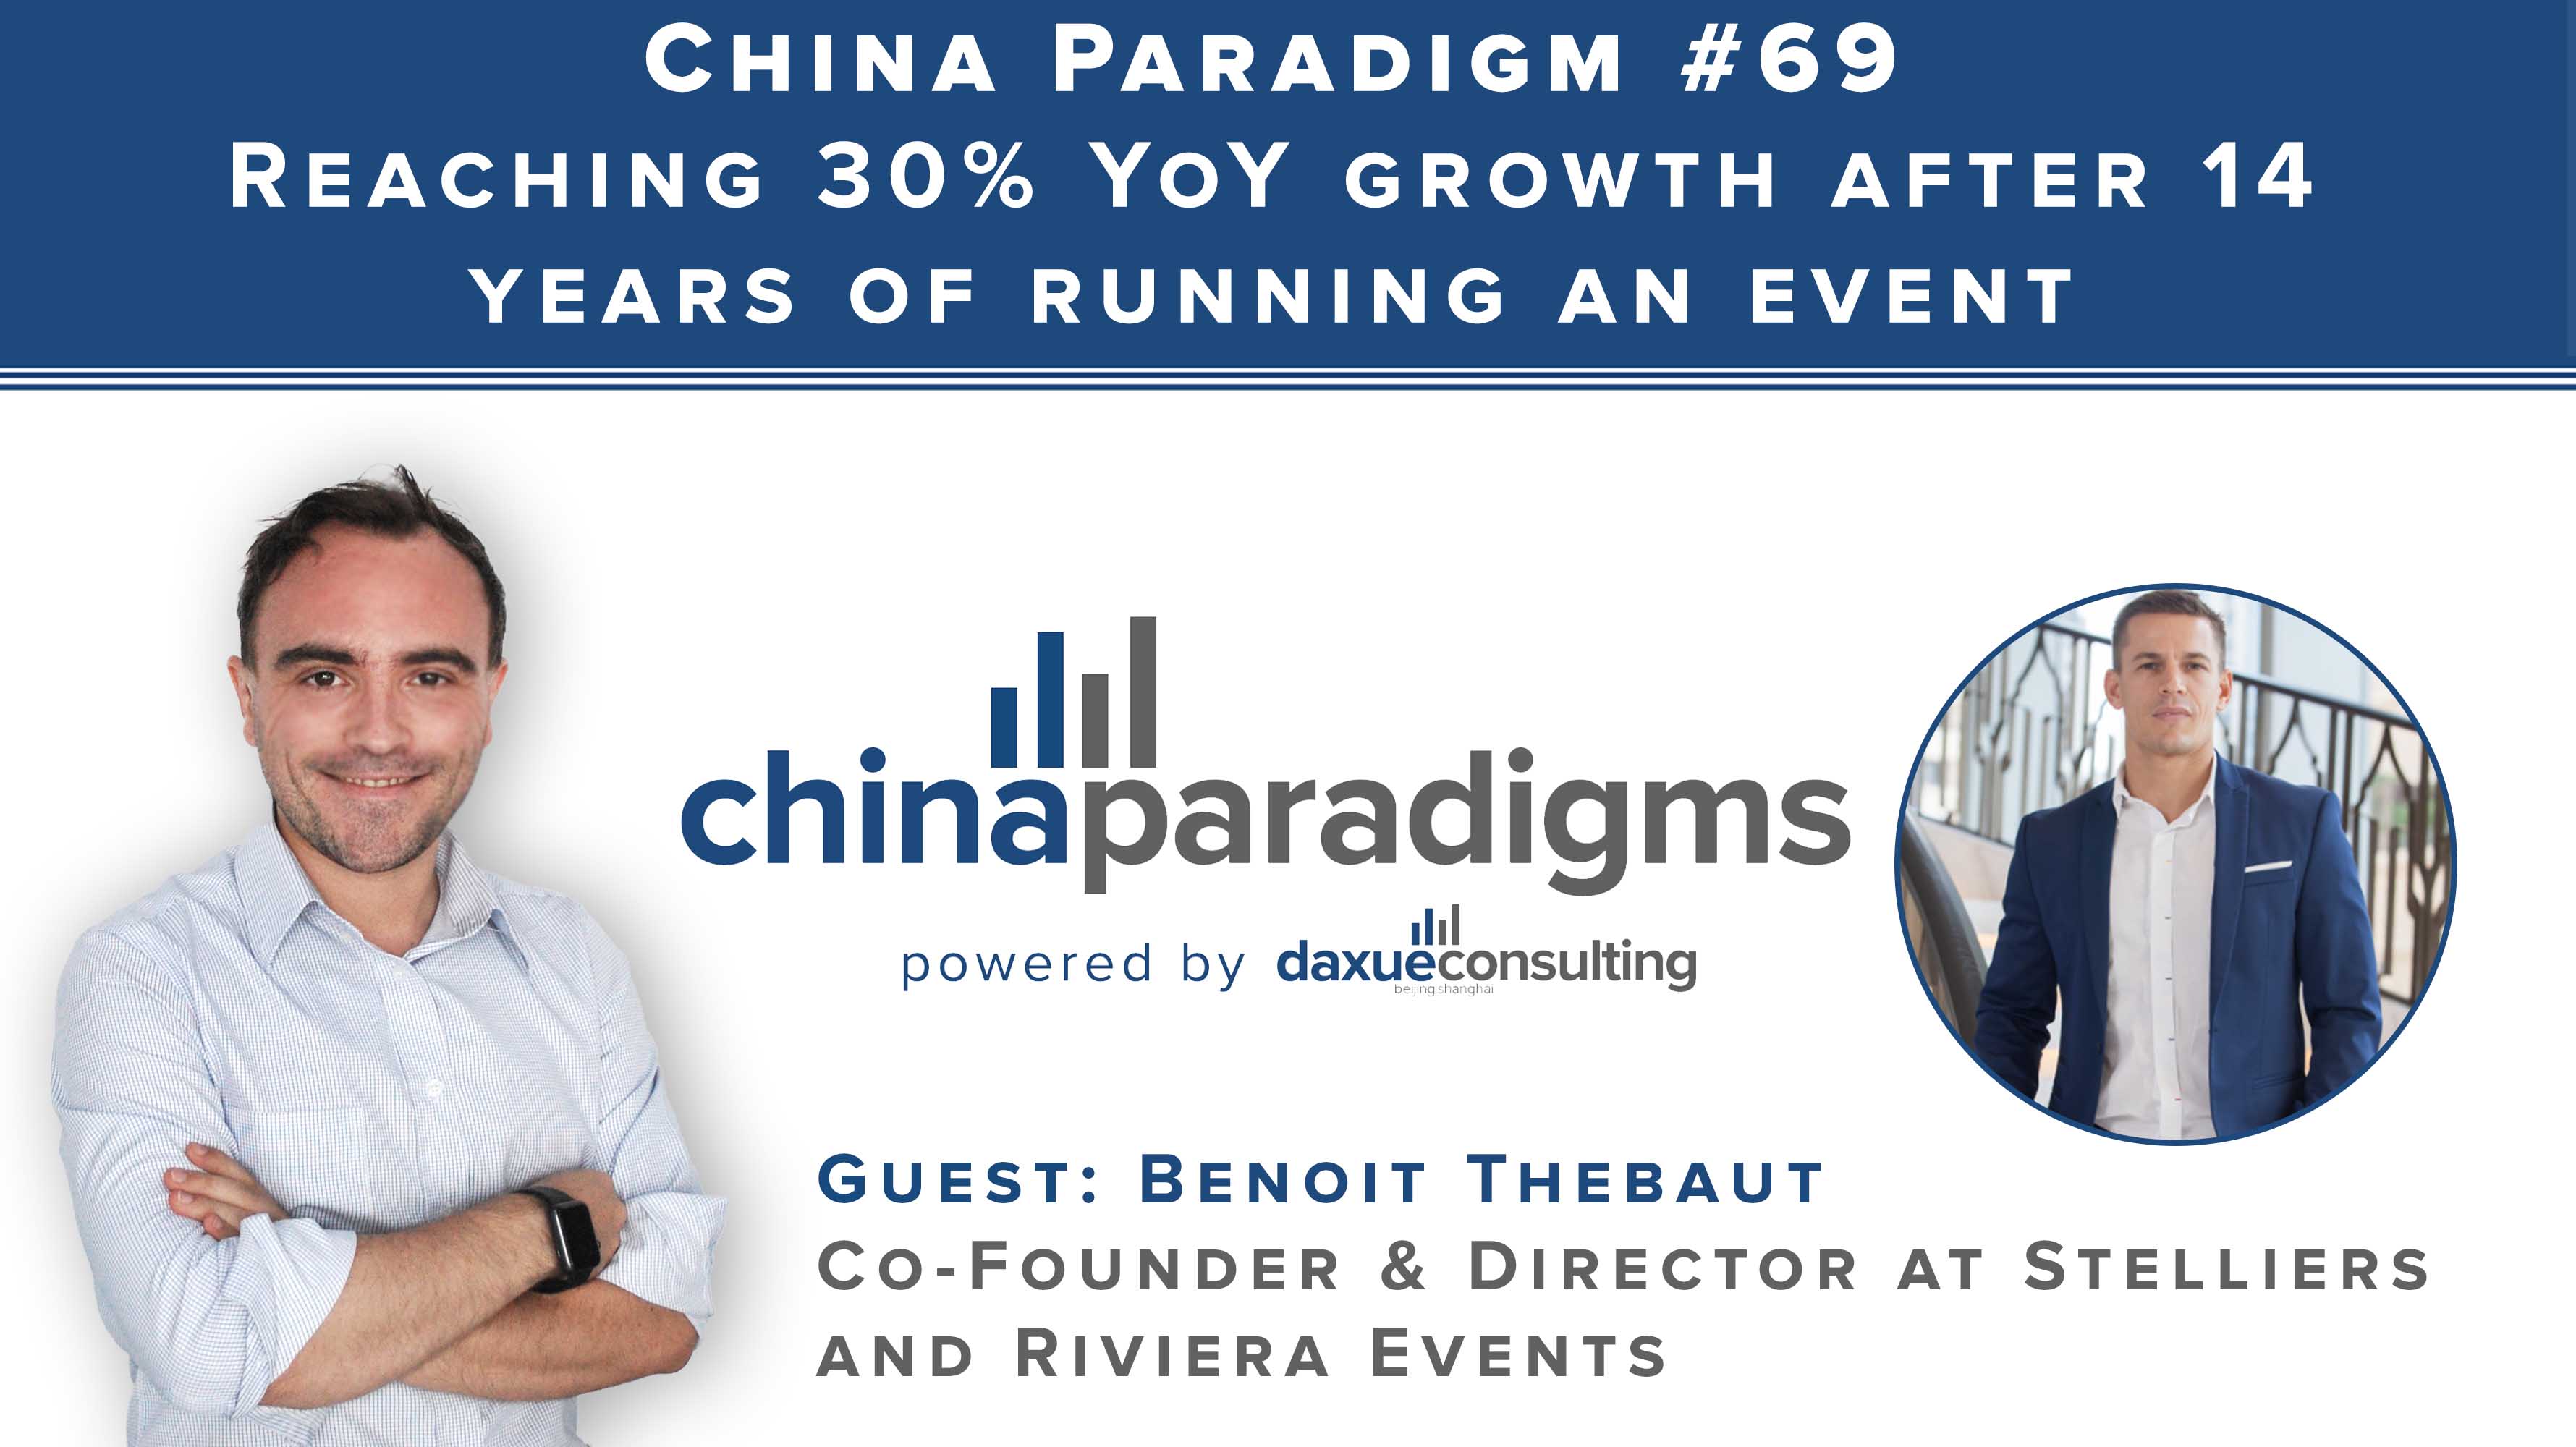 China Paradigm 69: Reaching 30% YoY growth after 14 years in China’s event management industry